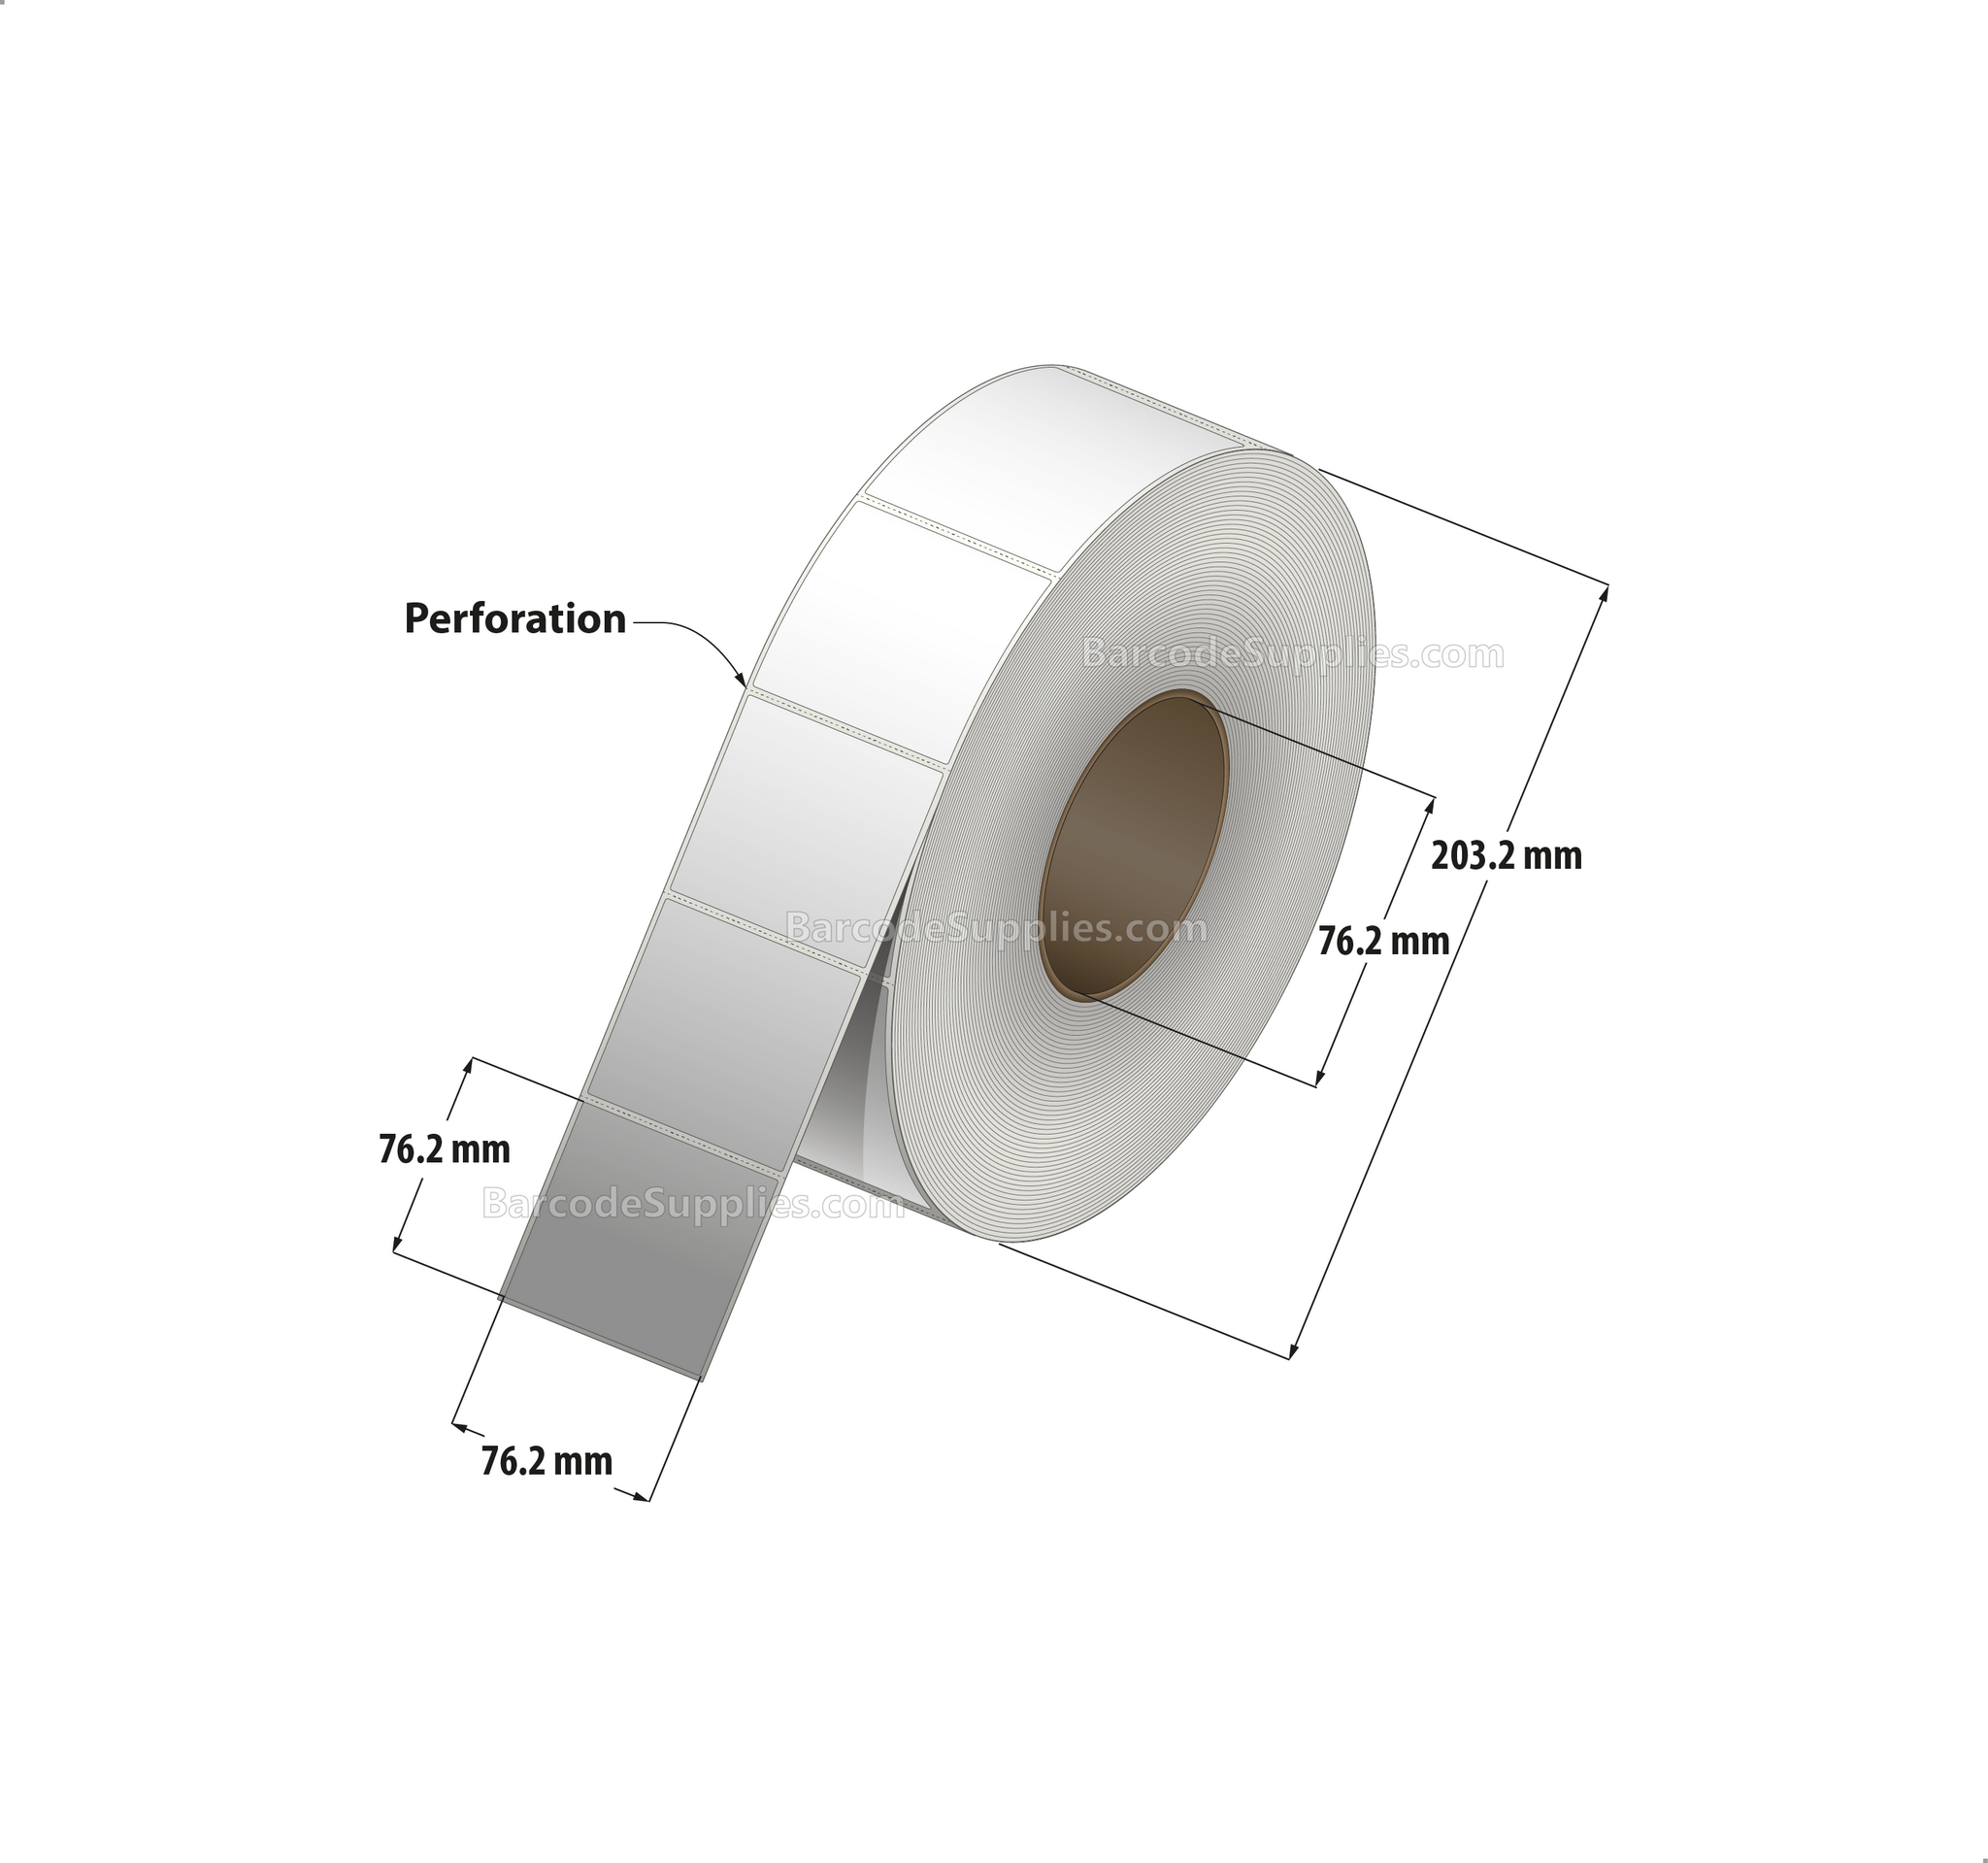 3 x 3 Thermal Transfer White Labels With Permanent Adhesive - Perforated - 2000 Labels Per Roll - Carton Of 8 Rolls - 16000 Labels Total - MPN: RT-3-3-2000-3